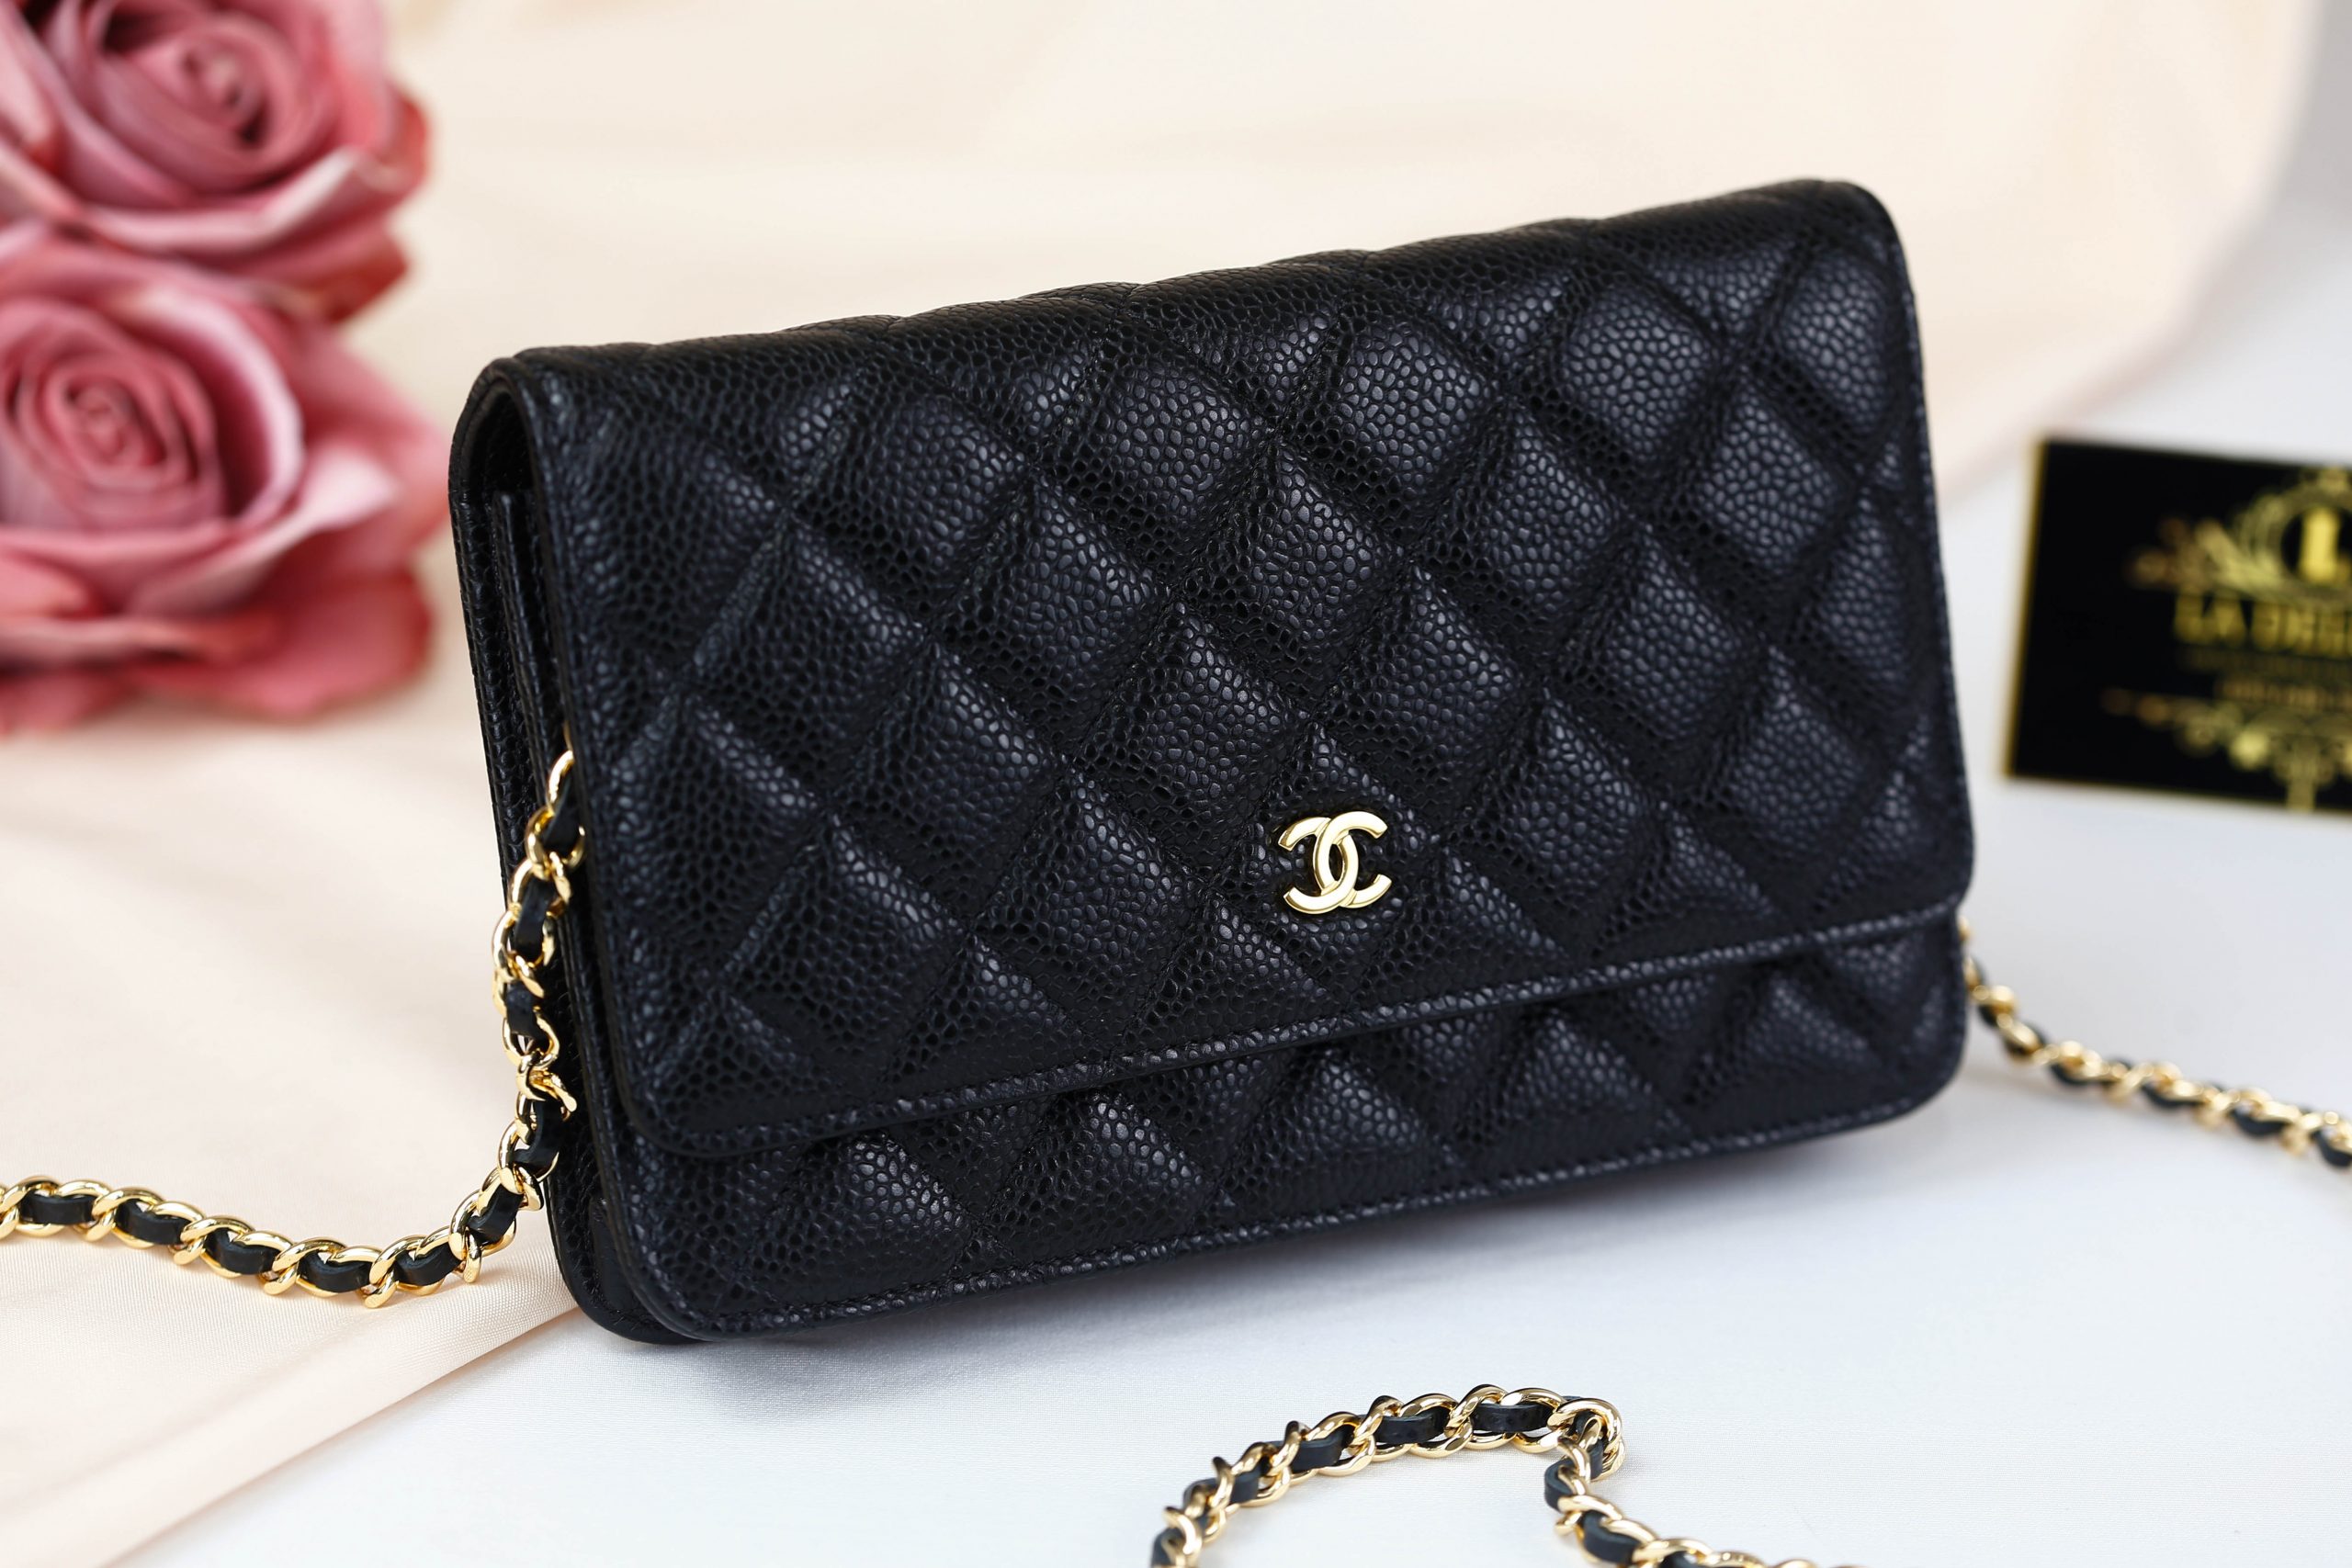 CHANEL CHANEL 19 WALLET ON CHAIN  Neiman Marcus